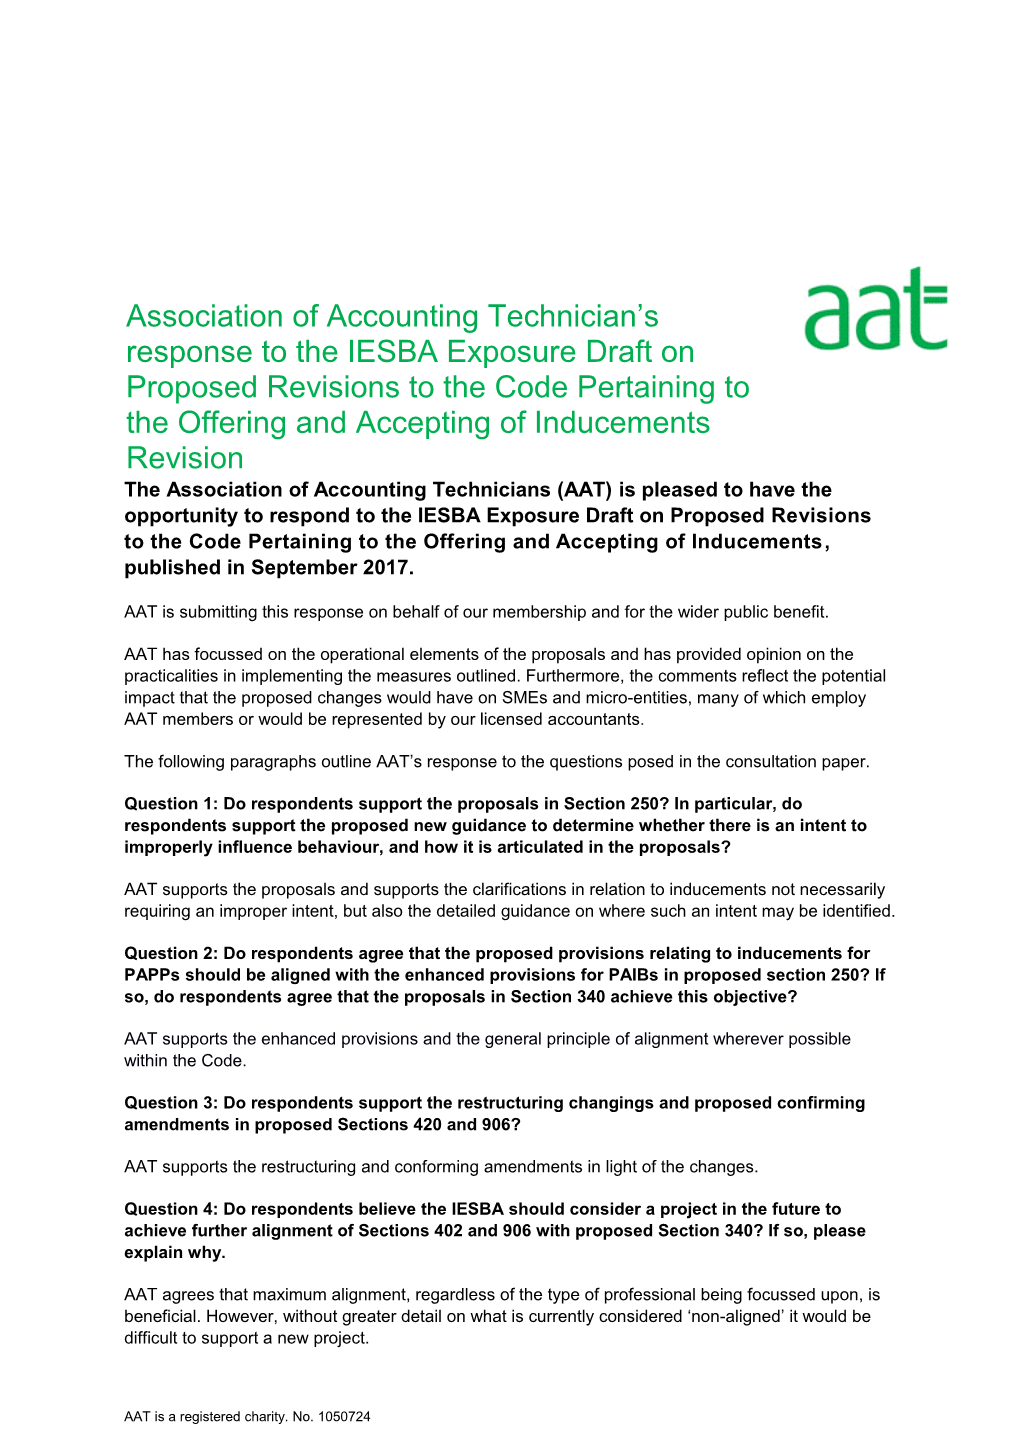 Association of Accounting Technician S Response Tothe IESBA Exposure Draft on Proposed